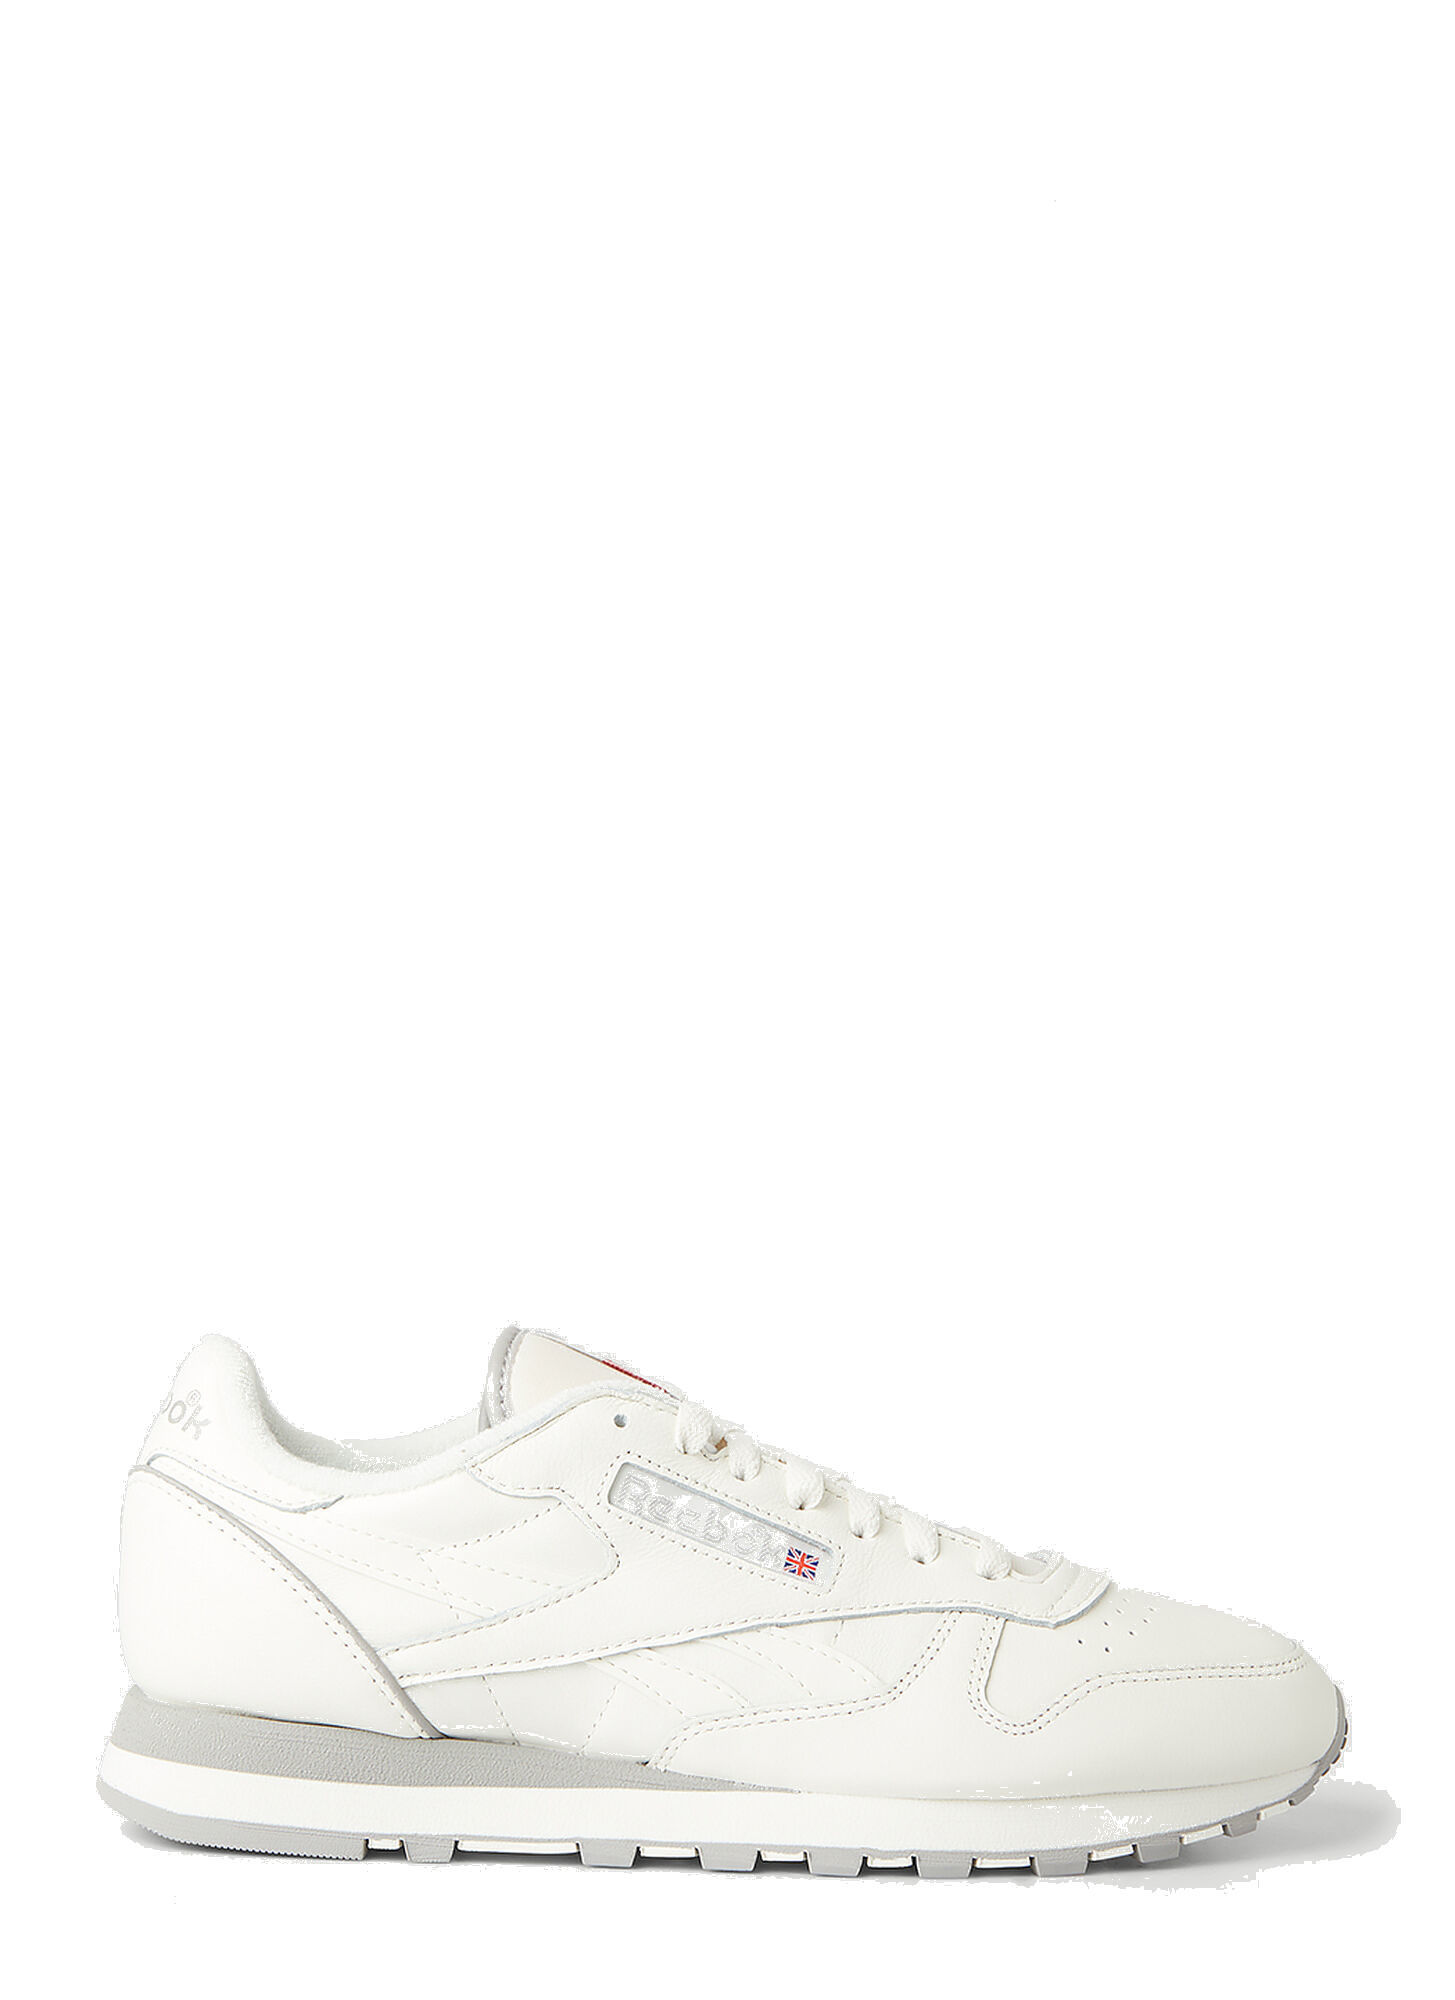 Classic Leather 1983 Vintage Sneakers in White Reebok